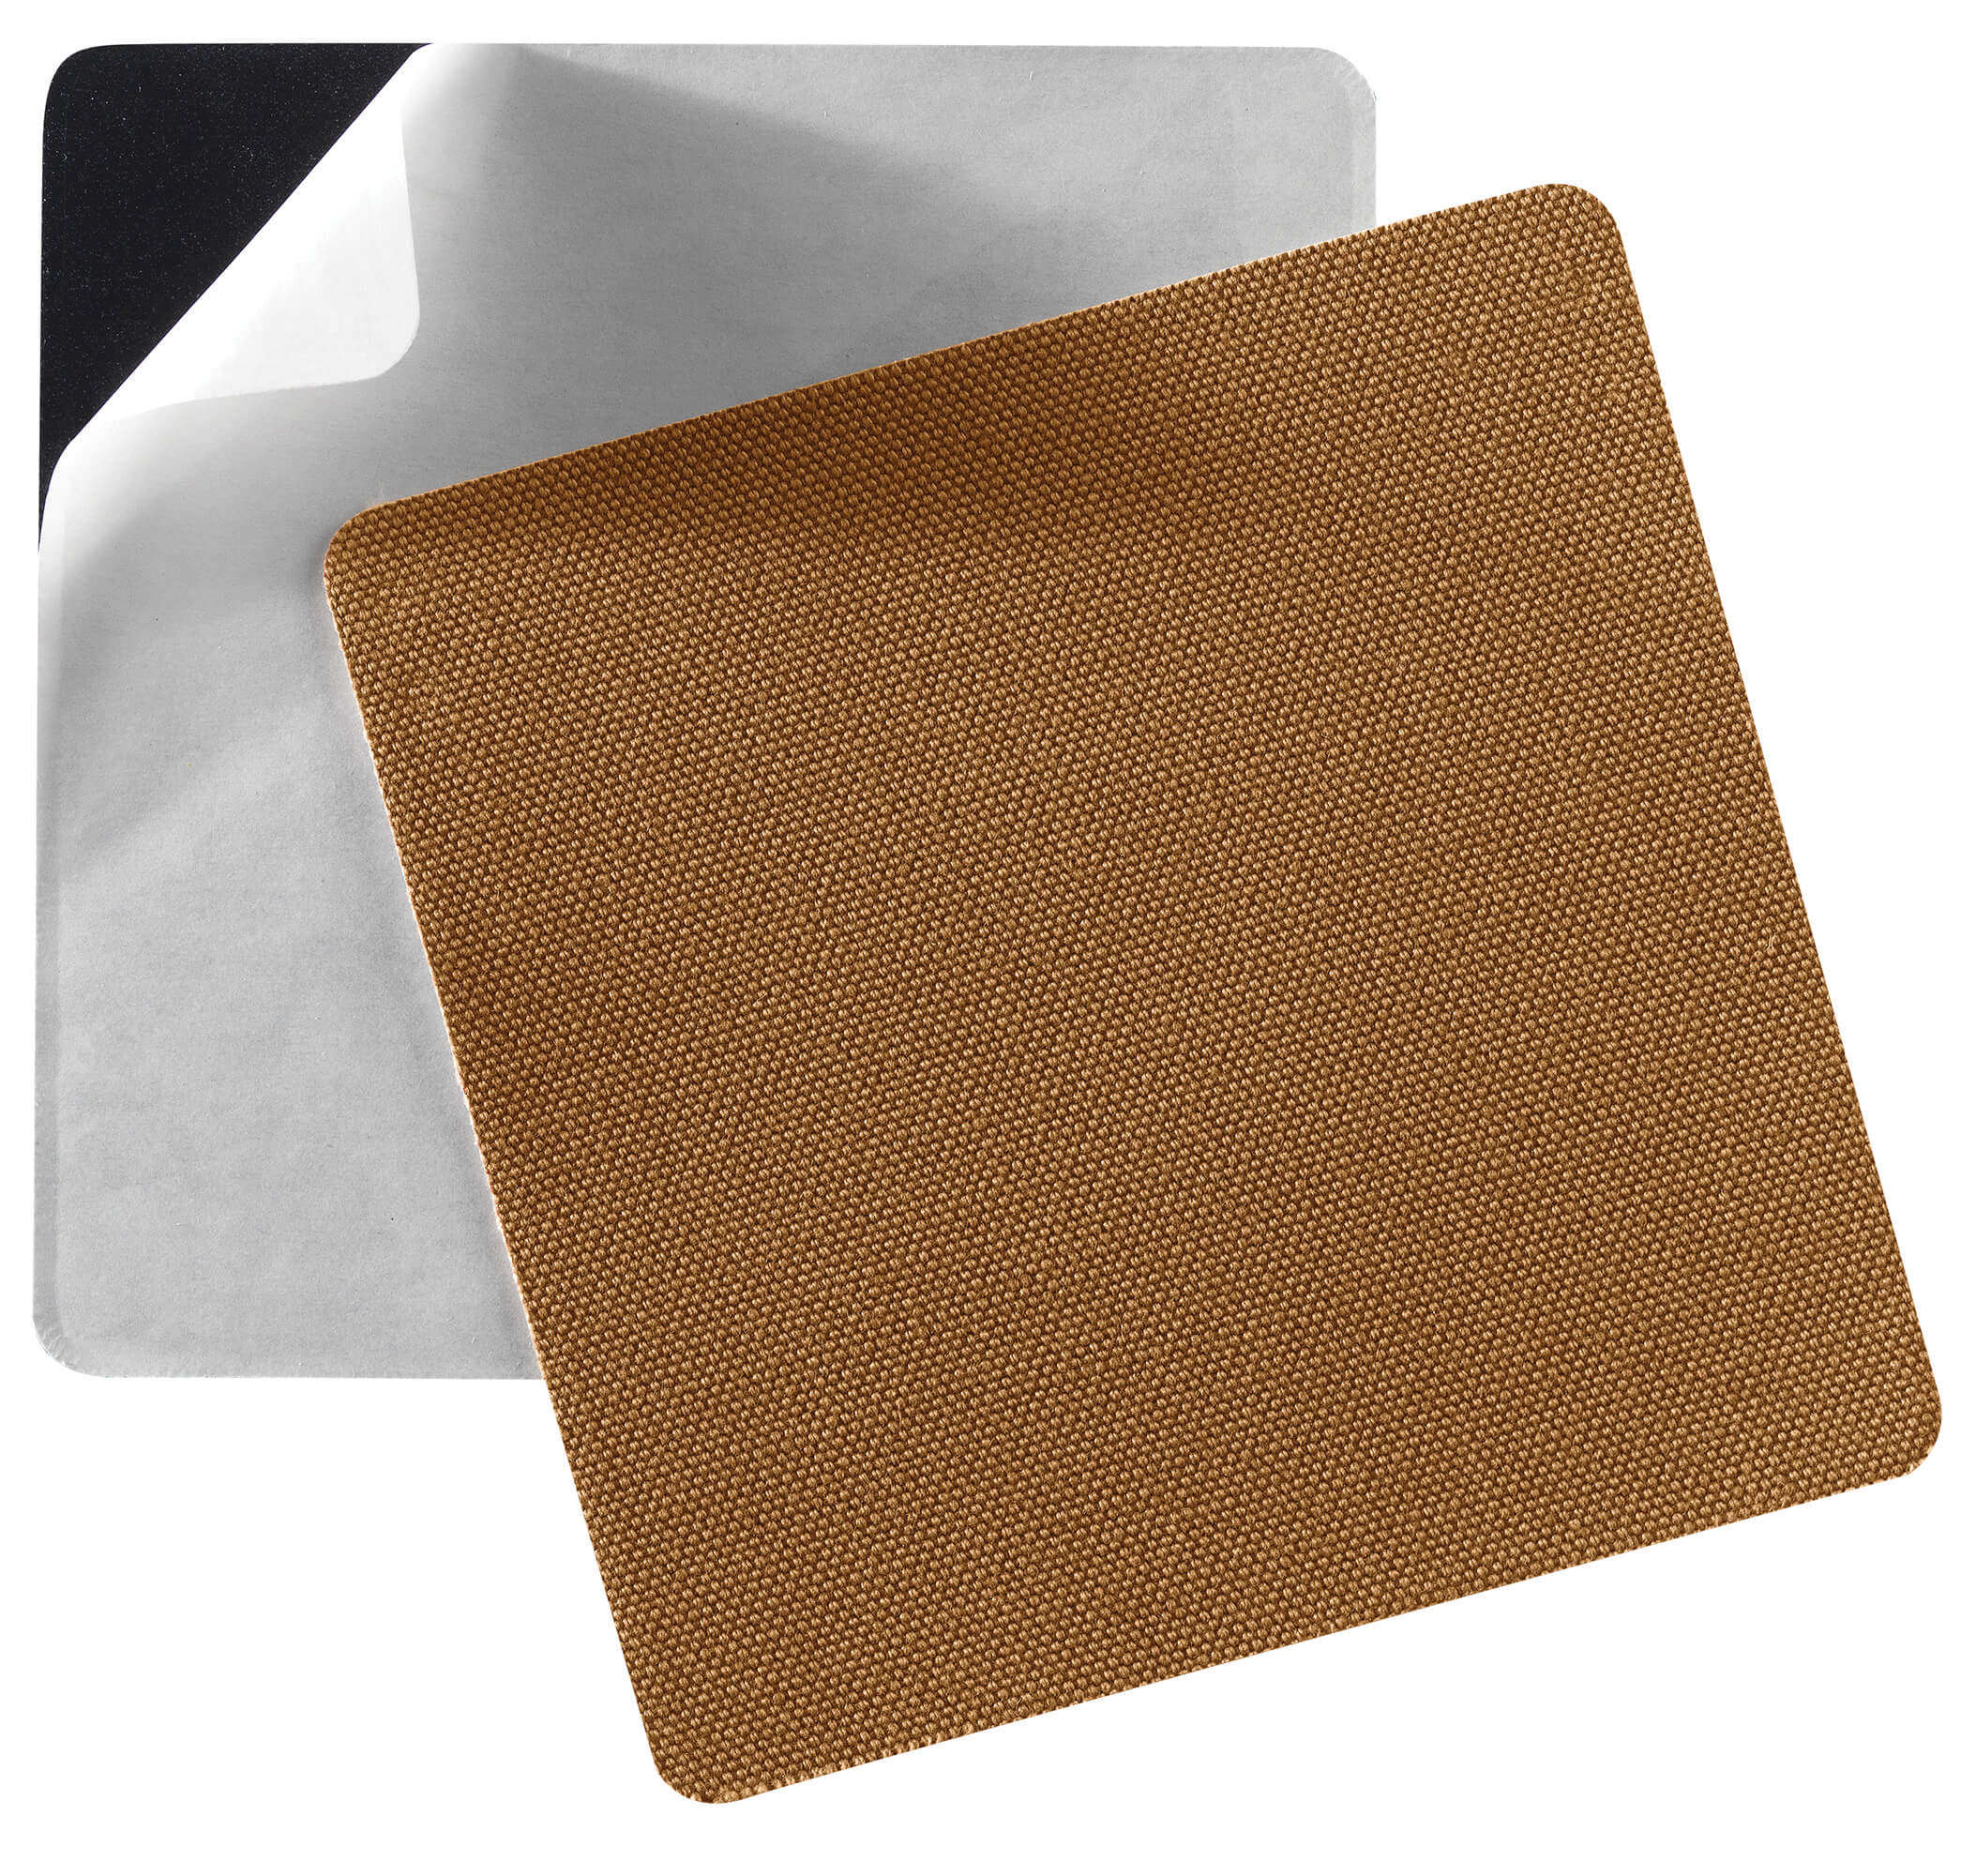 104152 - Carhartt 2 Pack Iron-On Repair Patches